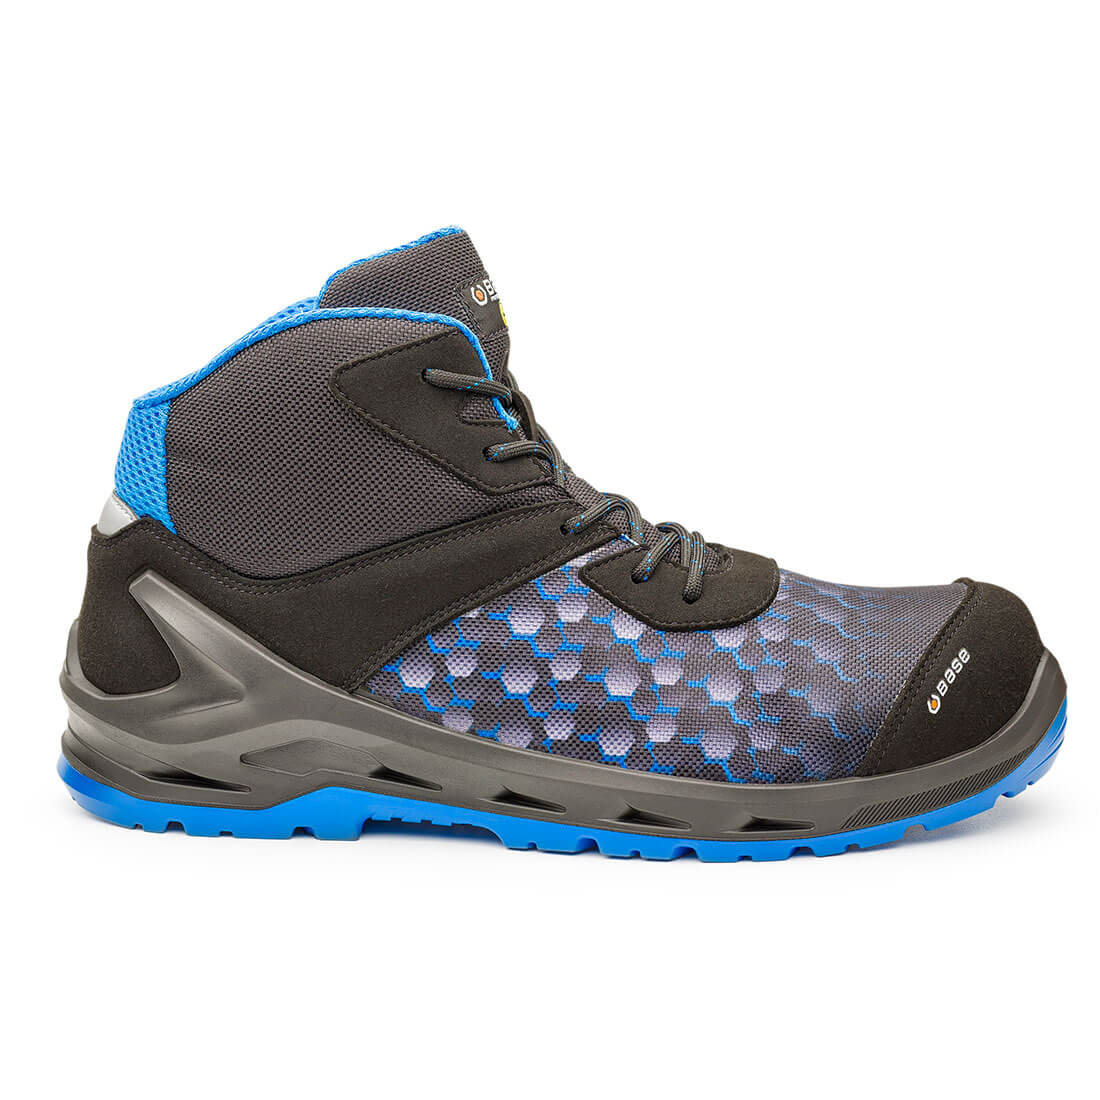 Base Protection i-Robox Blue Top Safety Boots